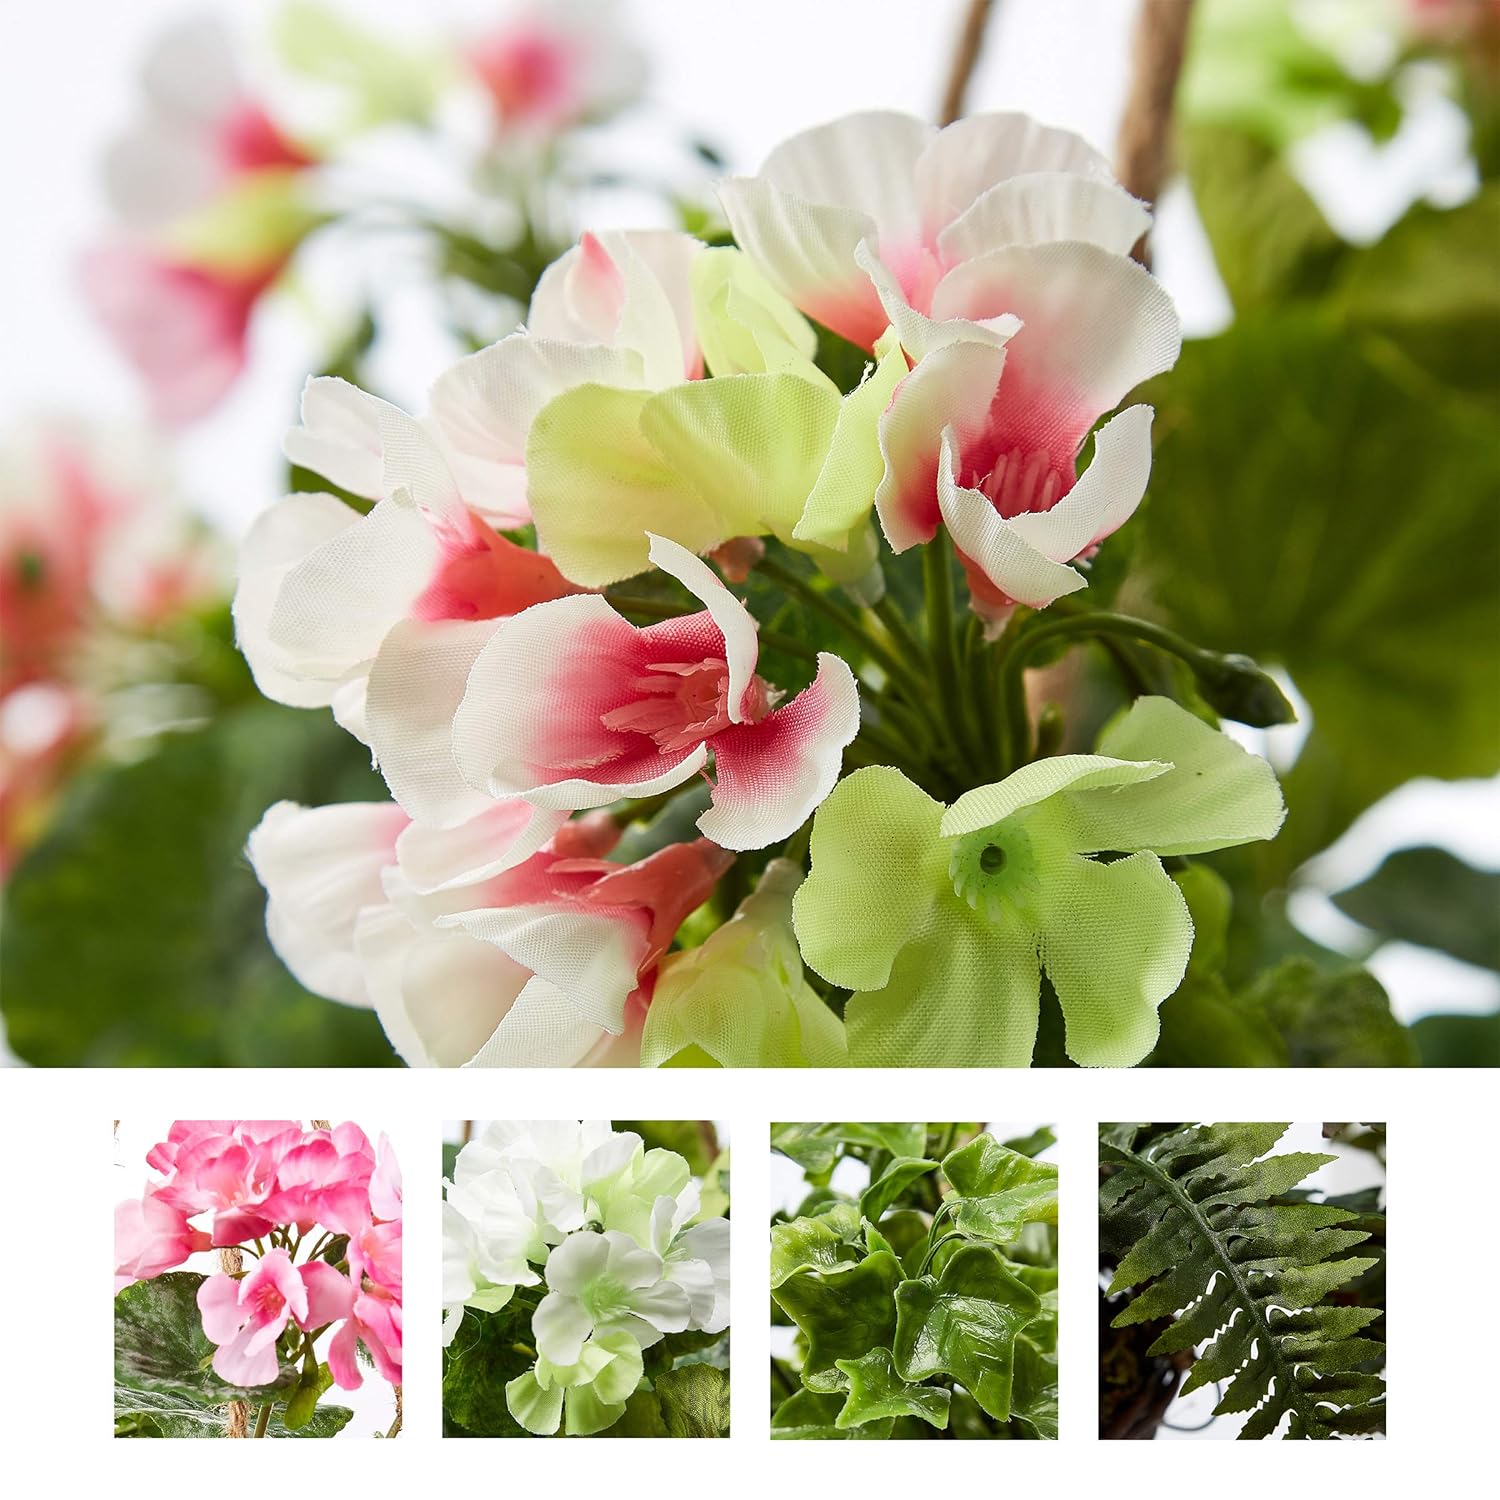 GCP Products Home Faux Flowers “ Geranium Hanging Natural And Lifelike Floral Arrangement With Basket Or Office By (Light Pink)